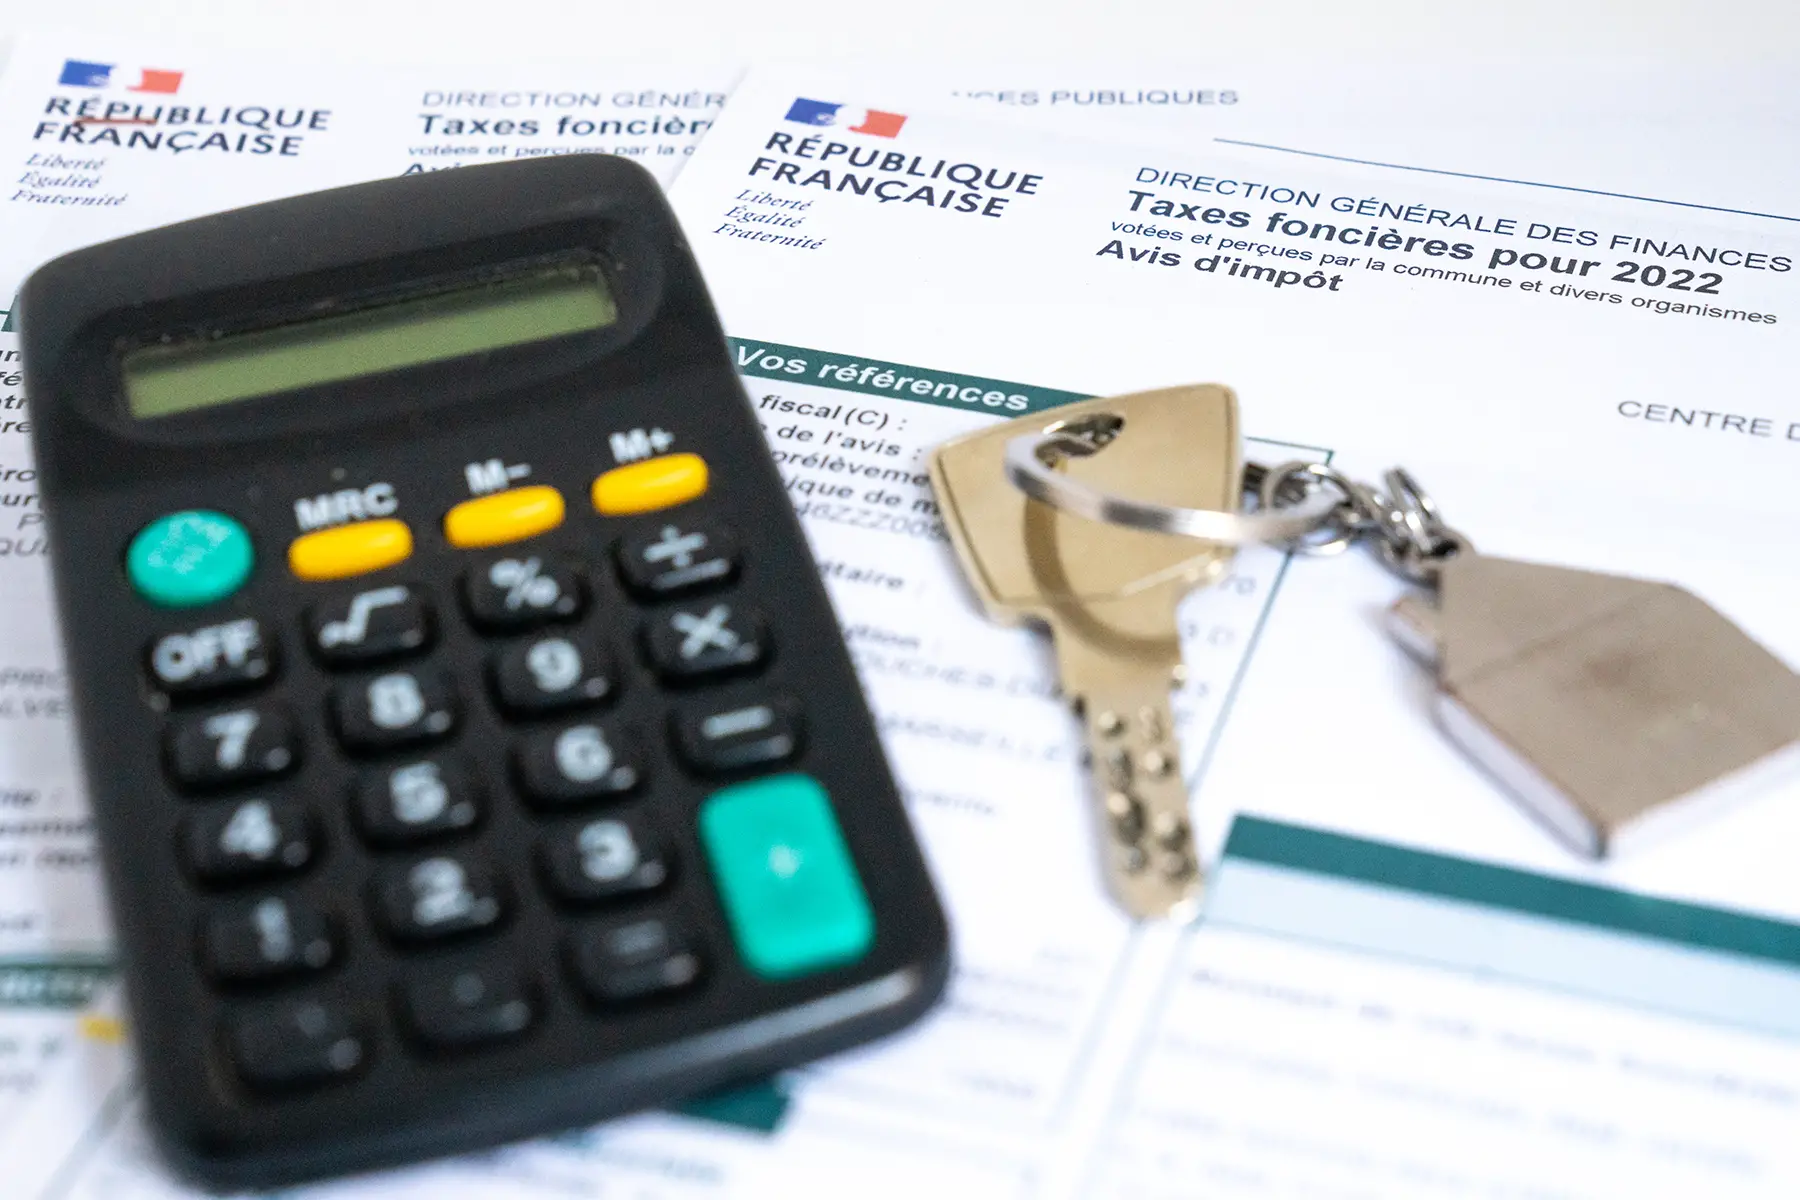 Calculator and house keys lying on top of tax forms